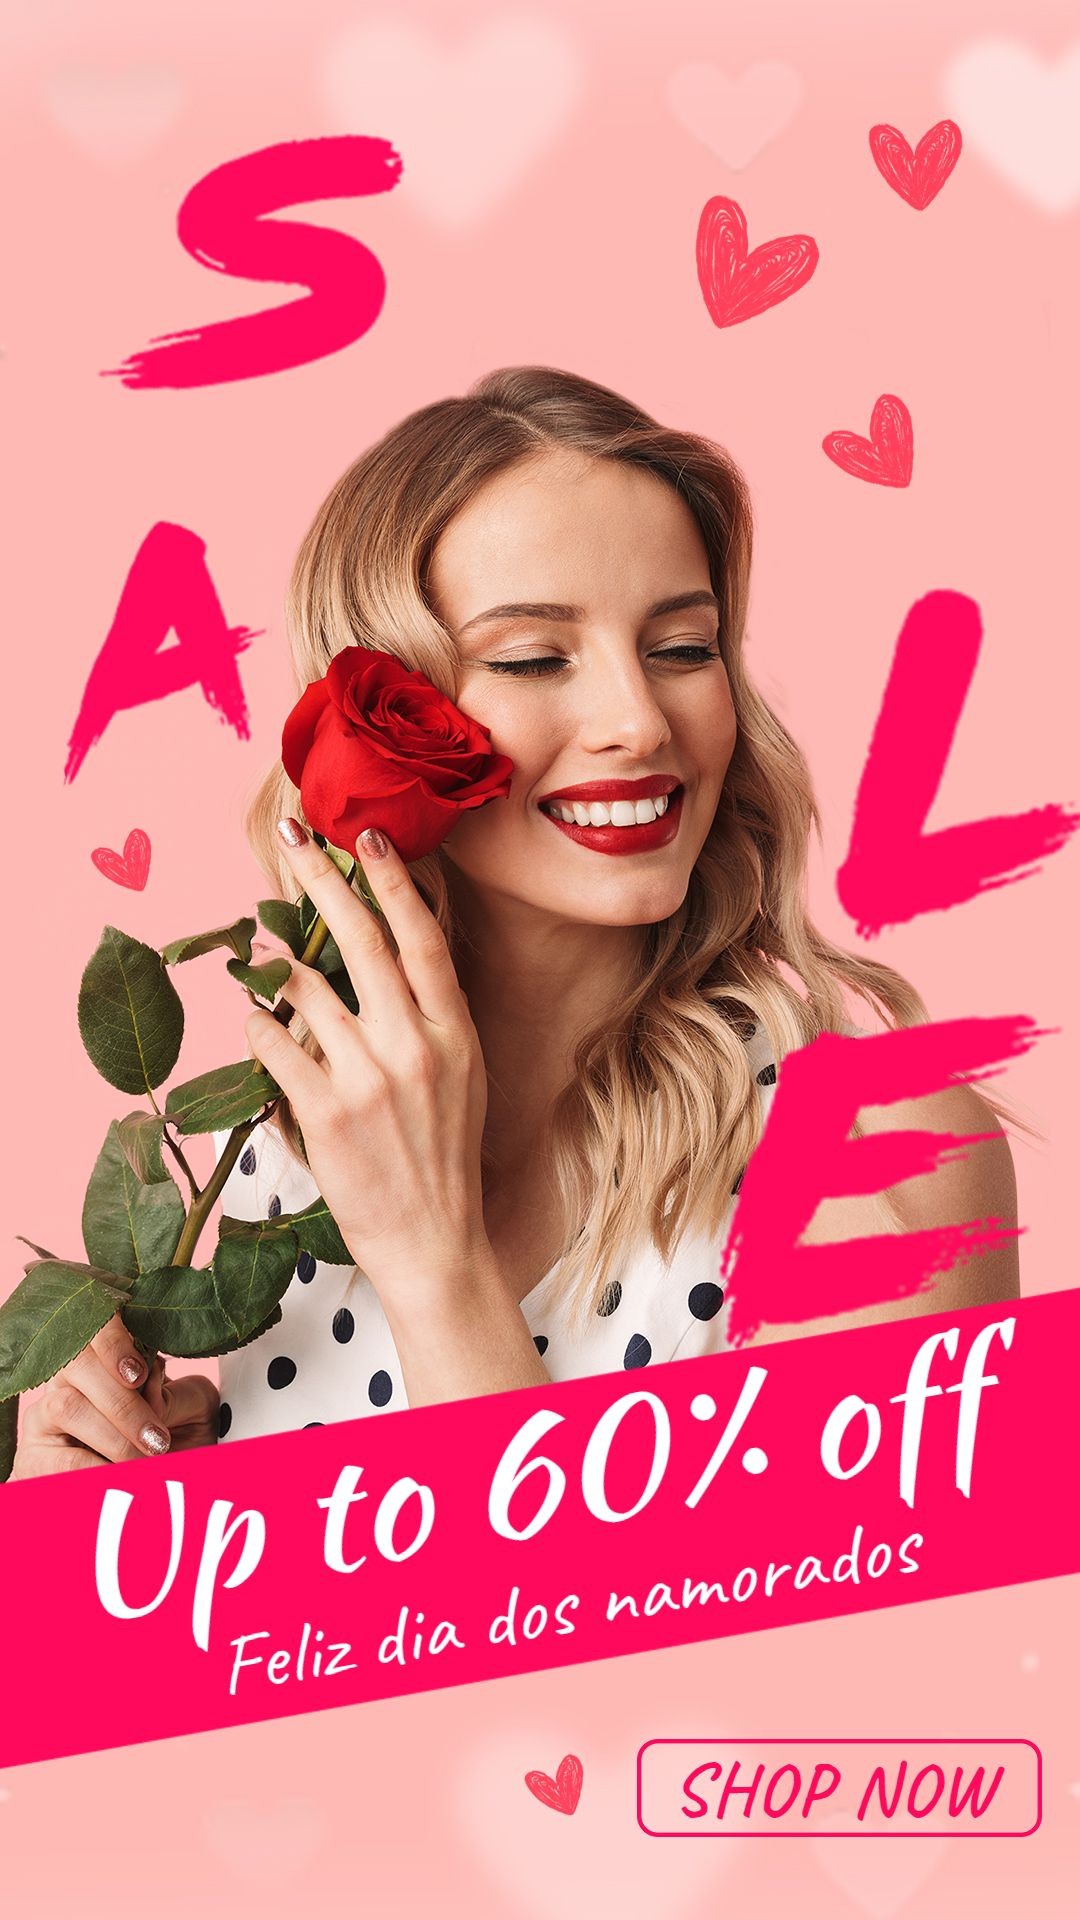 Pink Hearts Brazil Valentine's Day Dia dos namorados Women's Clothing Fashion Discount Sale Promo Ecommerce Story预览效果